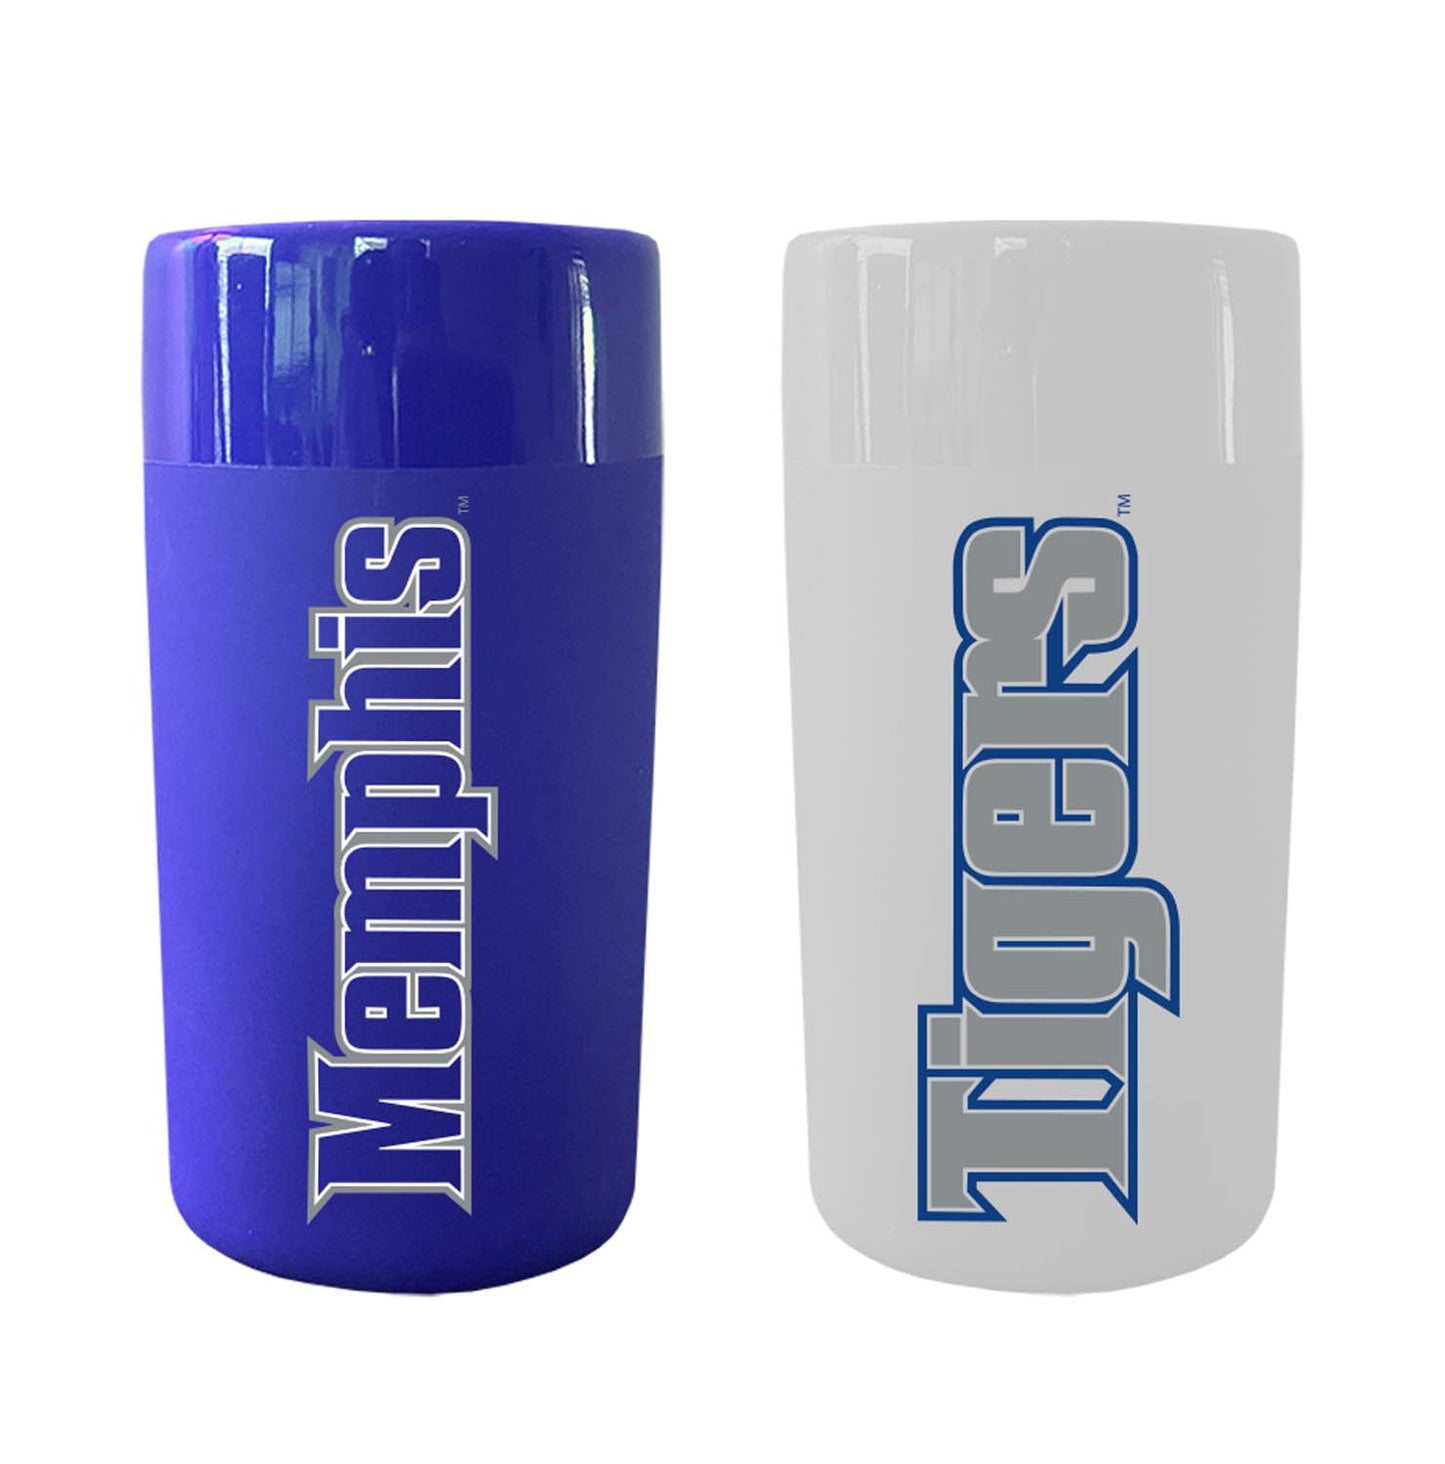 Memphis  Tigers College and University 2-Pack Shot Glasses - Team Color